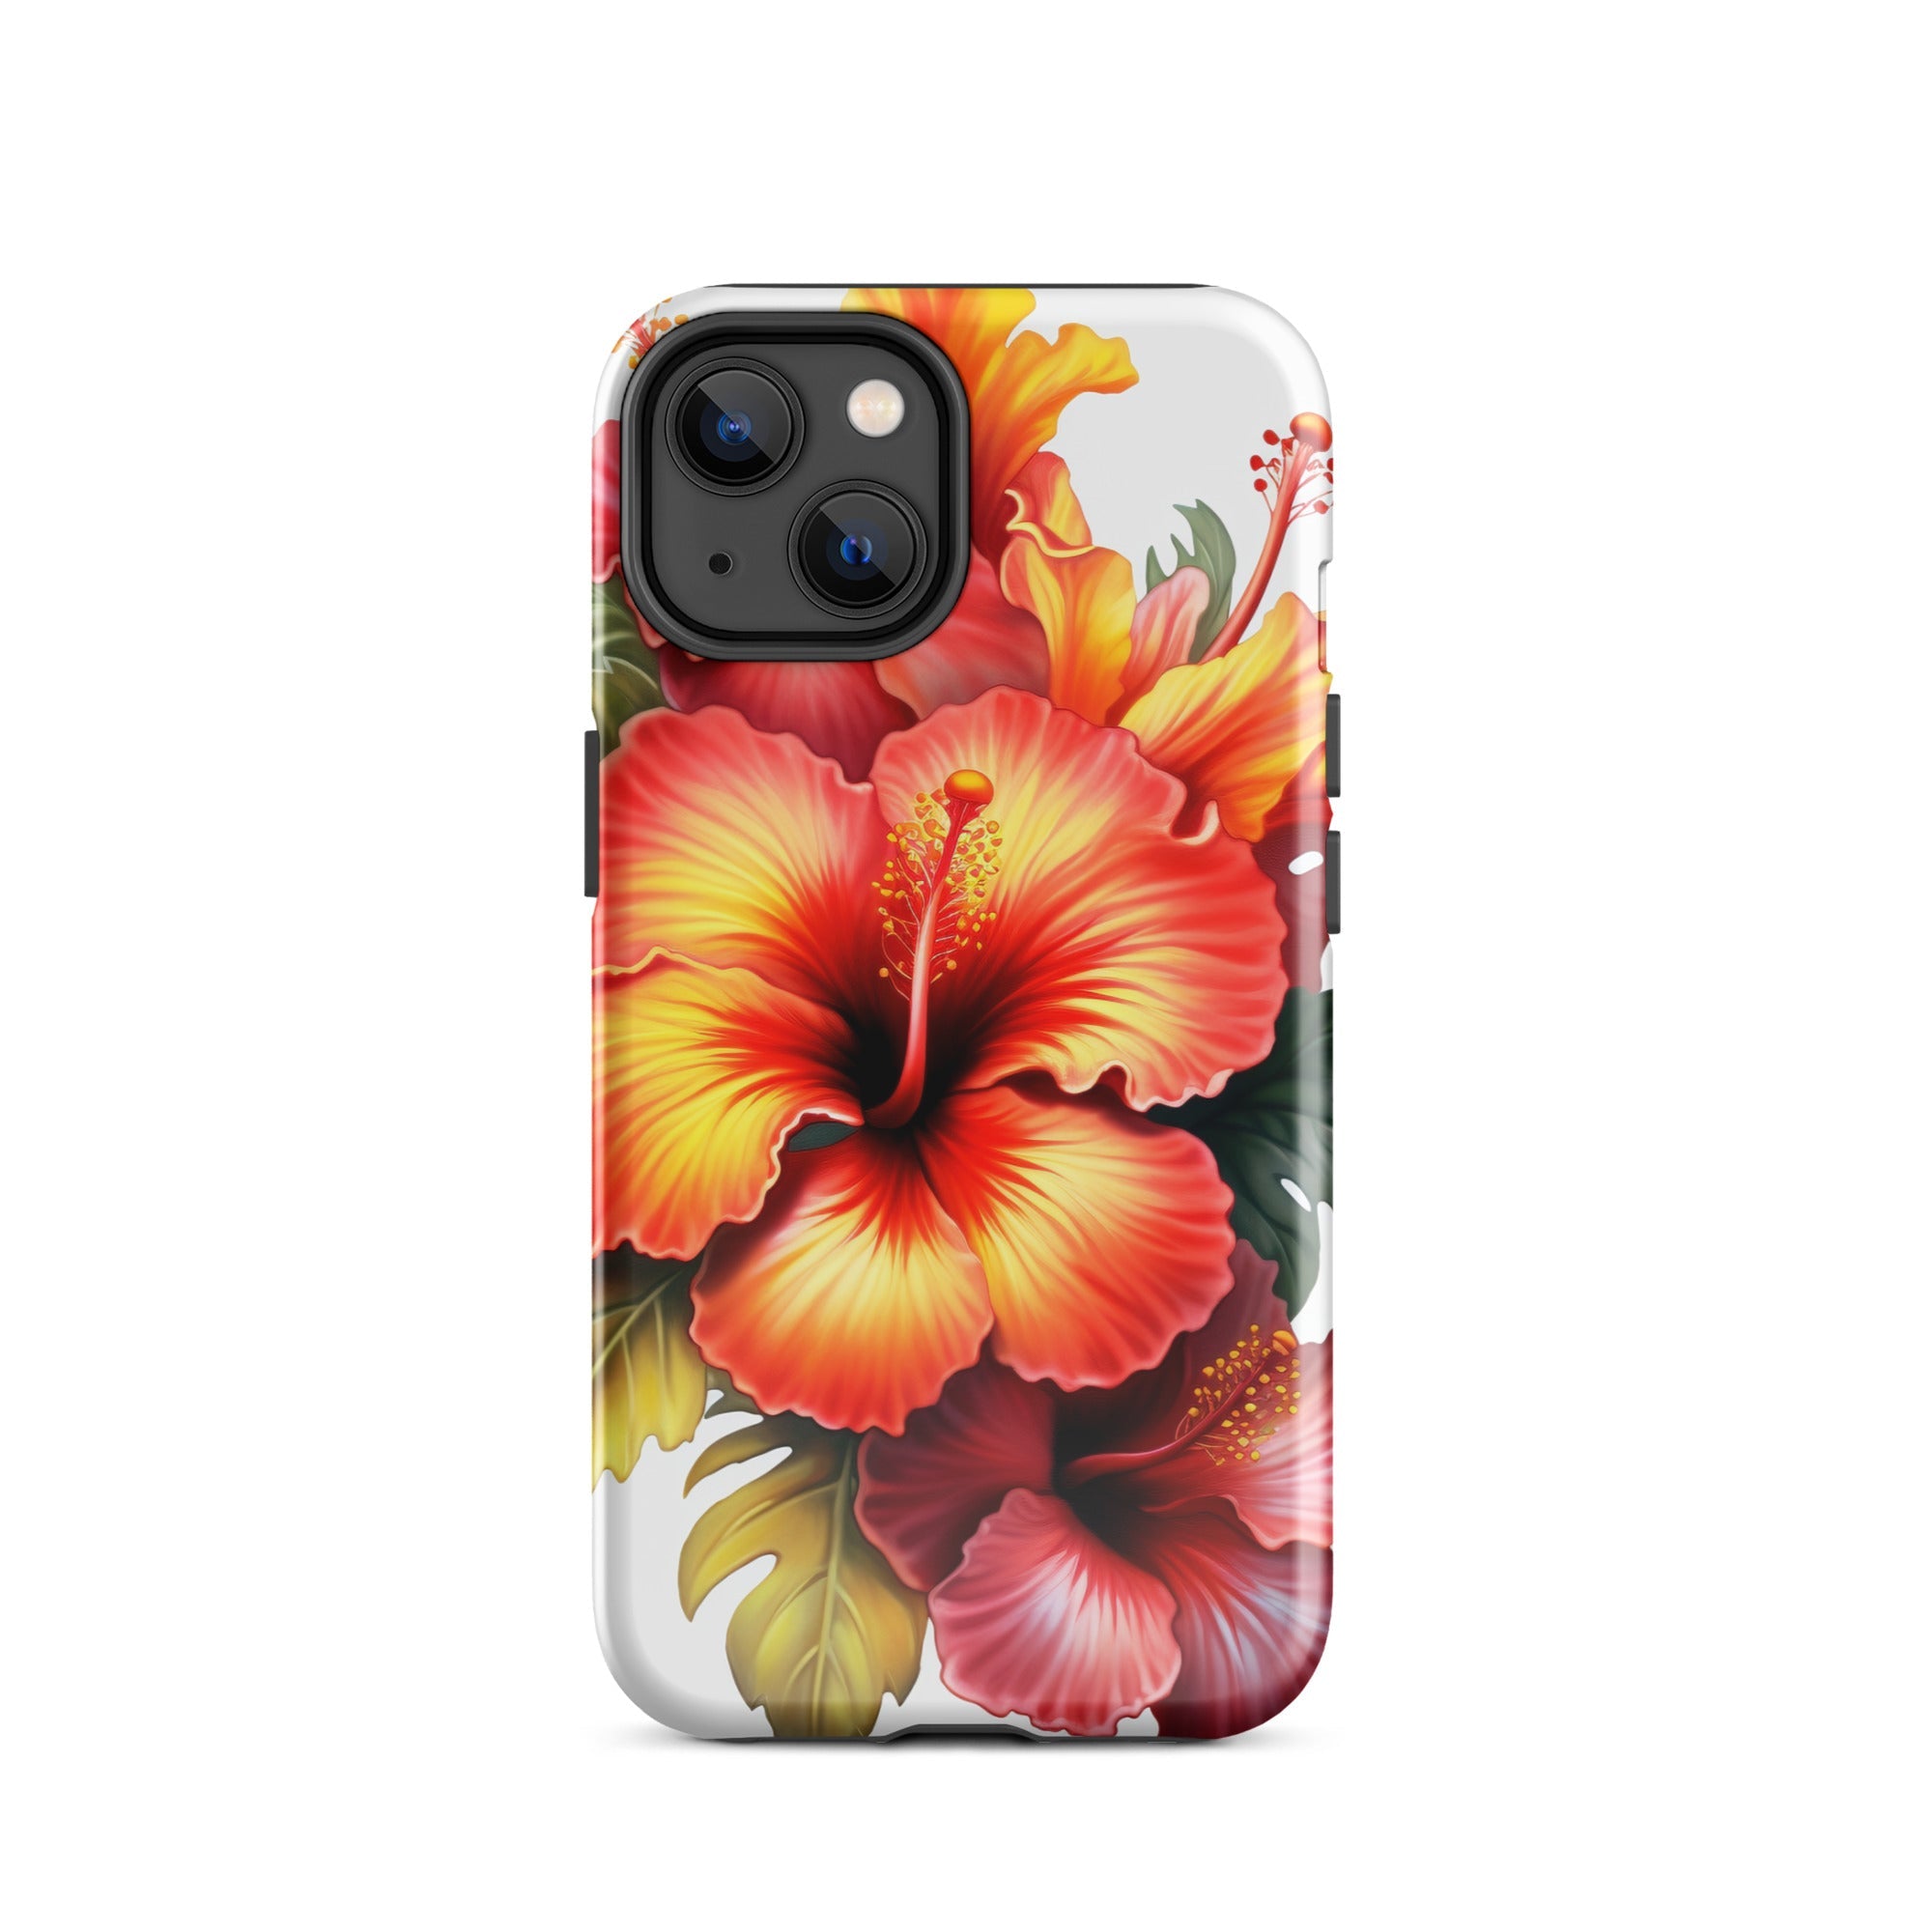 Hibiscus Flower iPhone Case by Visual Verse - Image 23